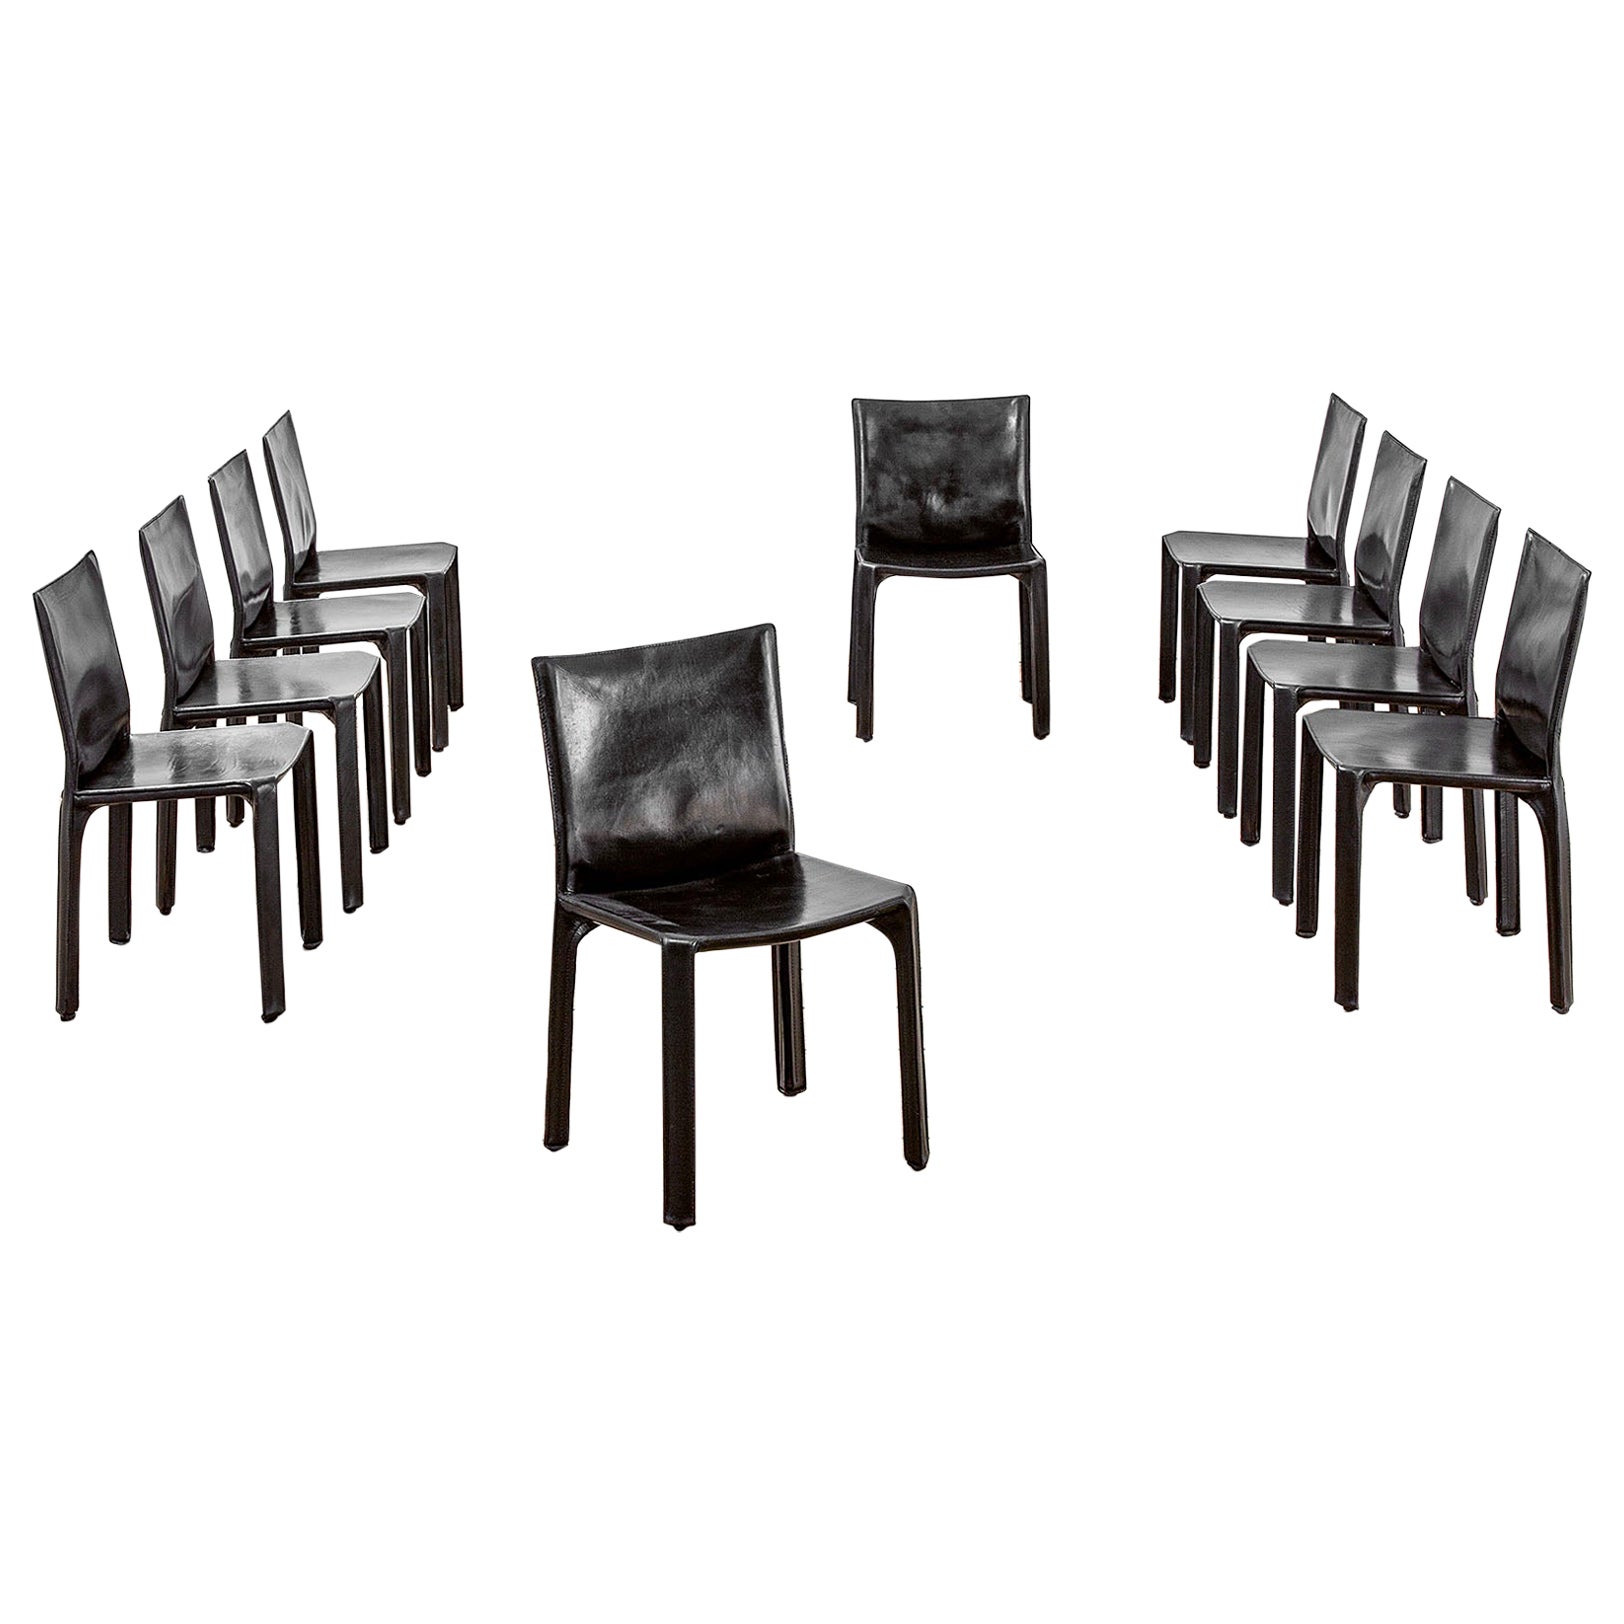 20th Century Mario Bellini Set of 10 Chairs mod. Cab in Black by Cassina, 70s